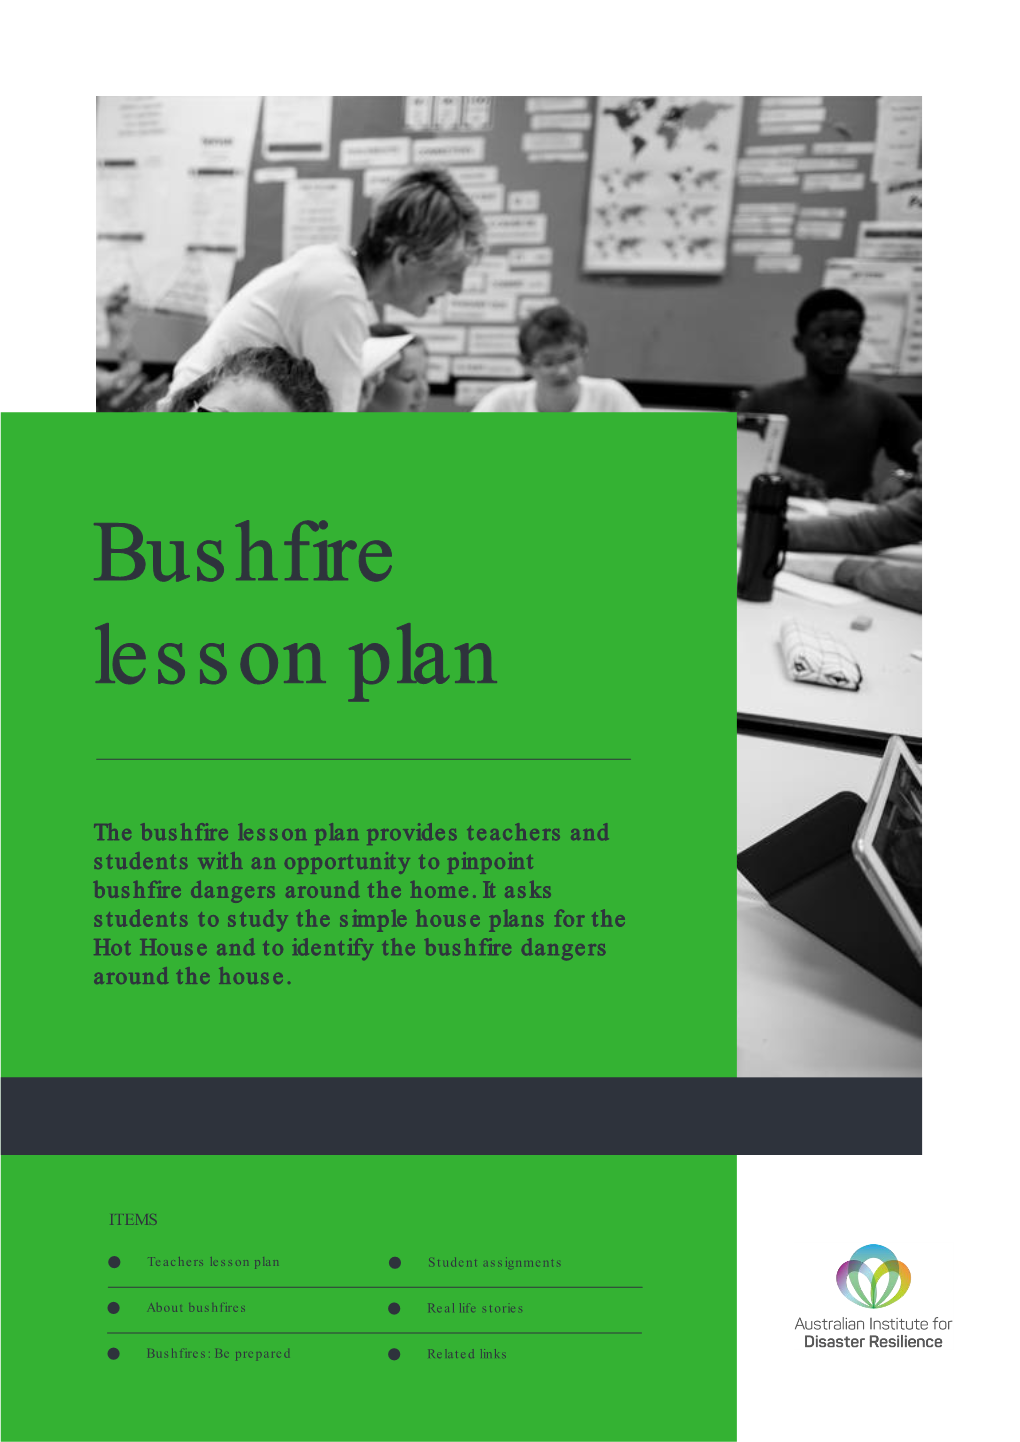 Bushfire Lesson Plan Provides Teachers and Students with an Opportunity to Pinpoint Bushfire Dangers Around the Home